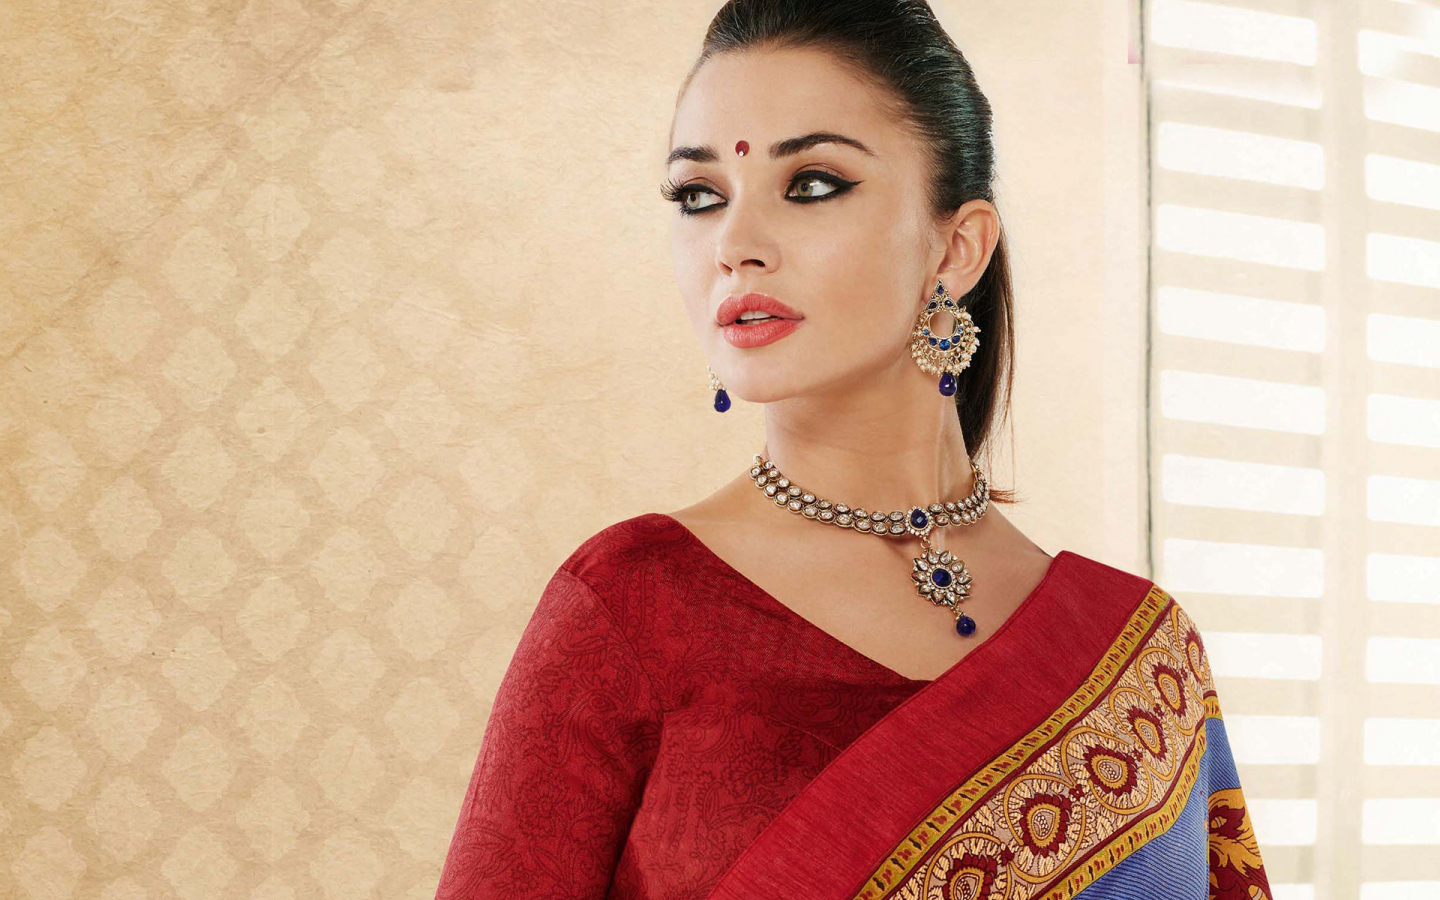 Download 1440x900 Wallpaper Amy Jackson, Model, Indian Saree, Widescreen  16:10, Widescreen, 1440x900 Hd Image, Background, 30684